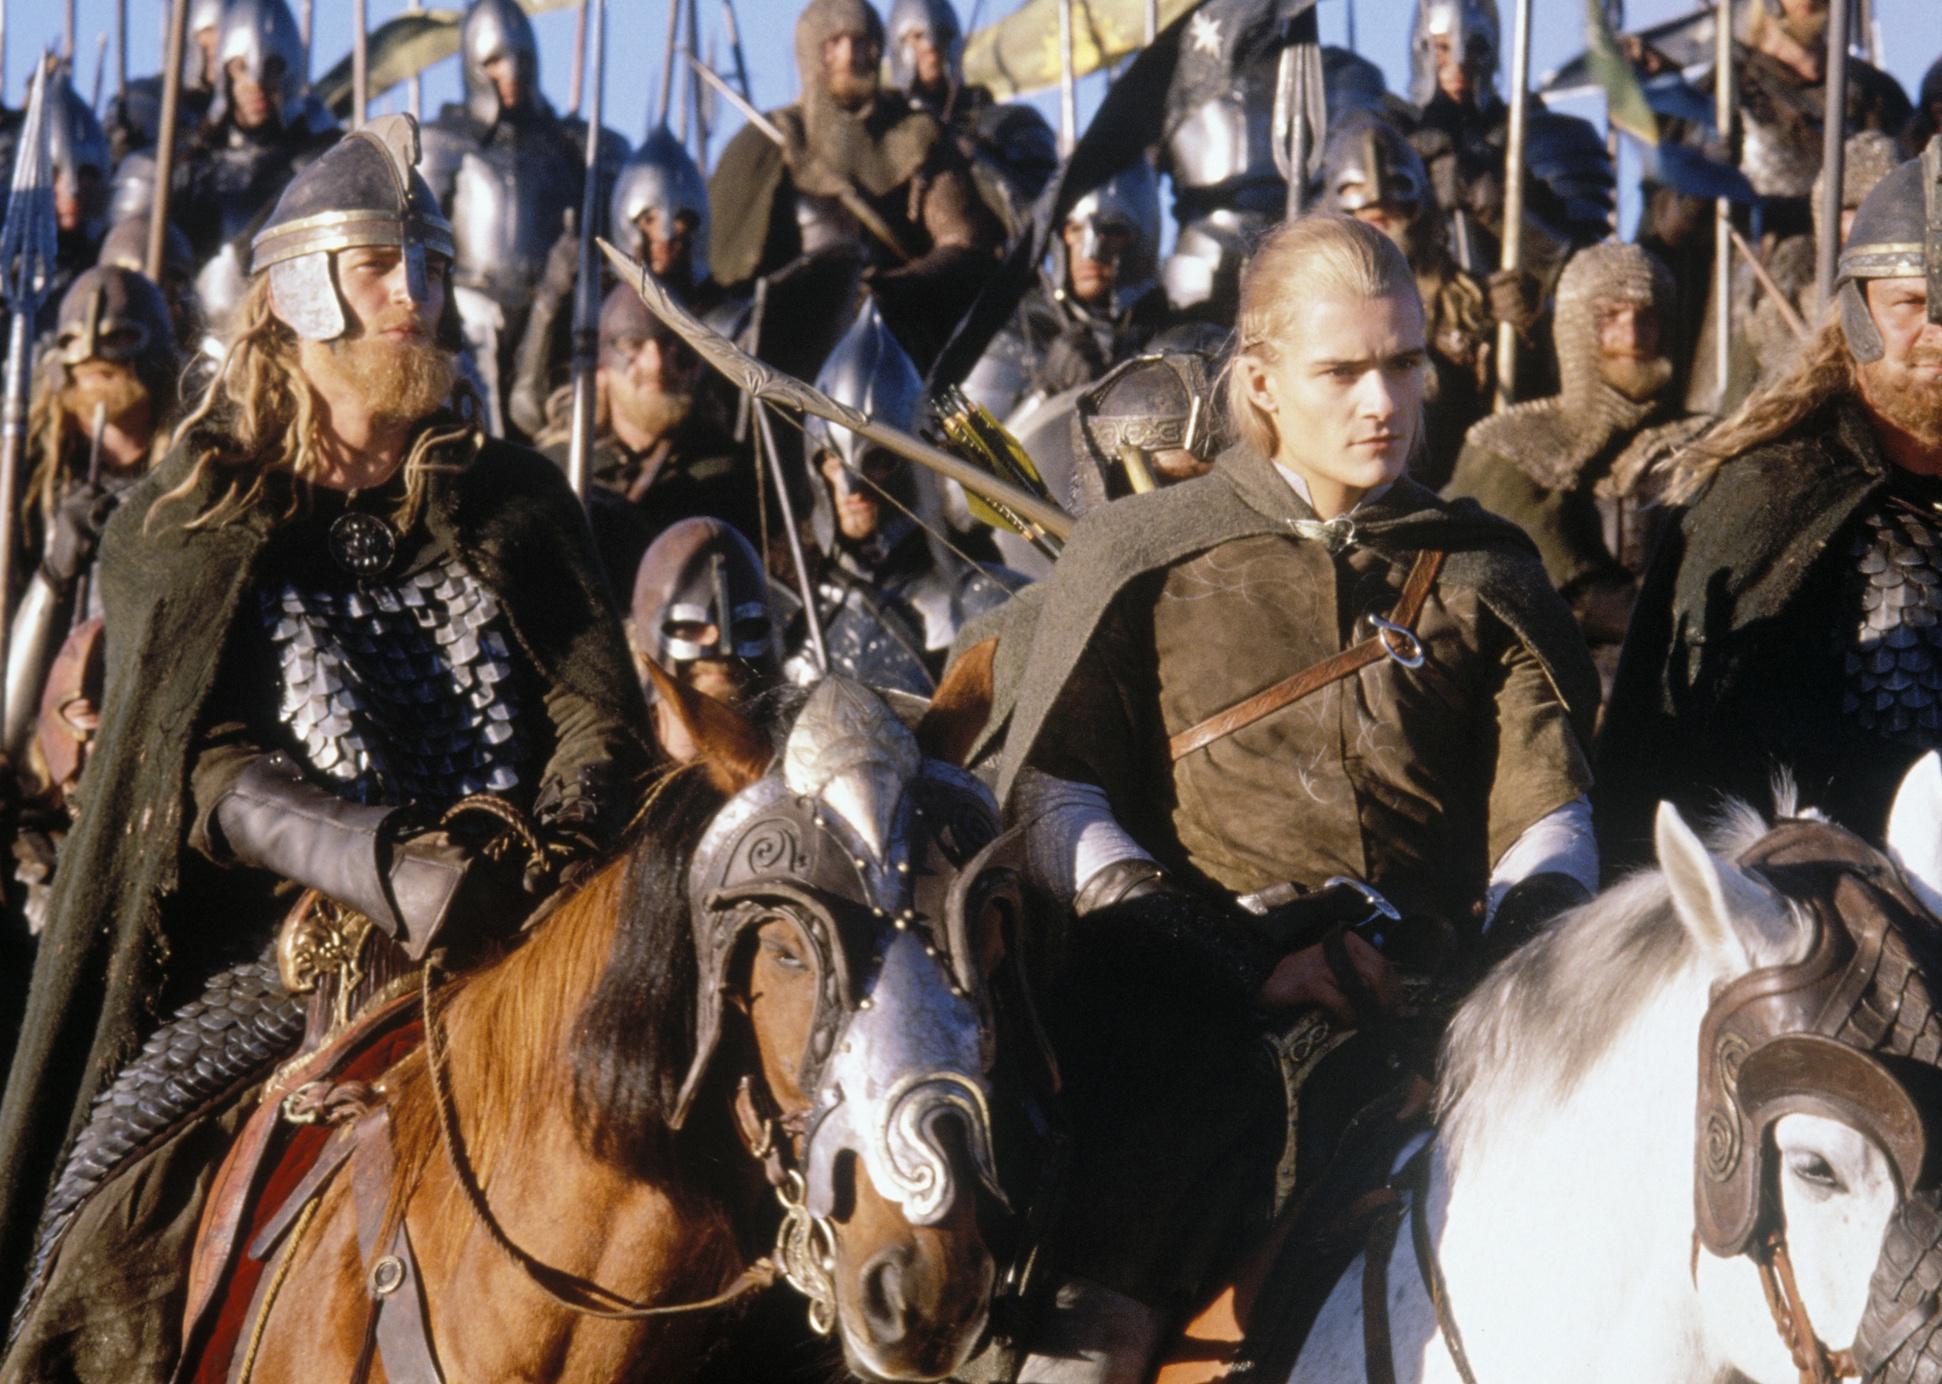 Orlando Bloom with a crowd on horseback with weapons and armor.